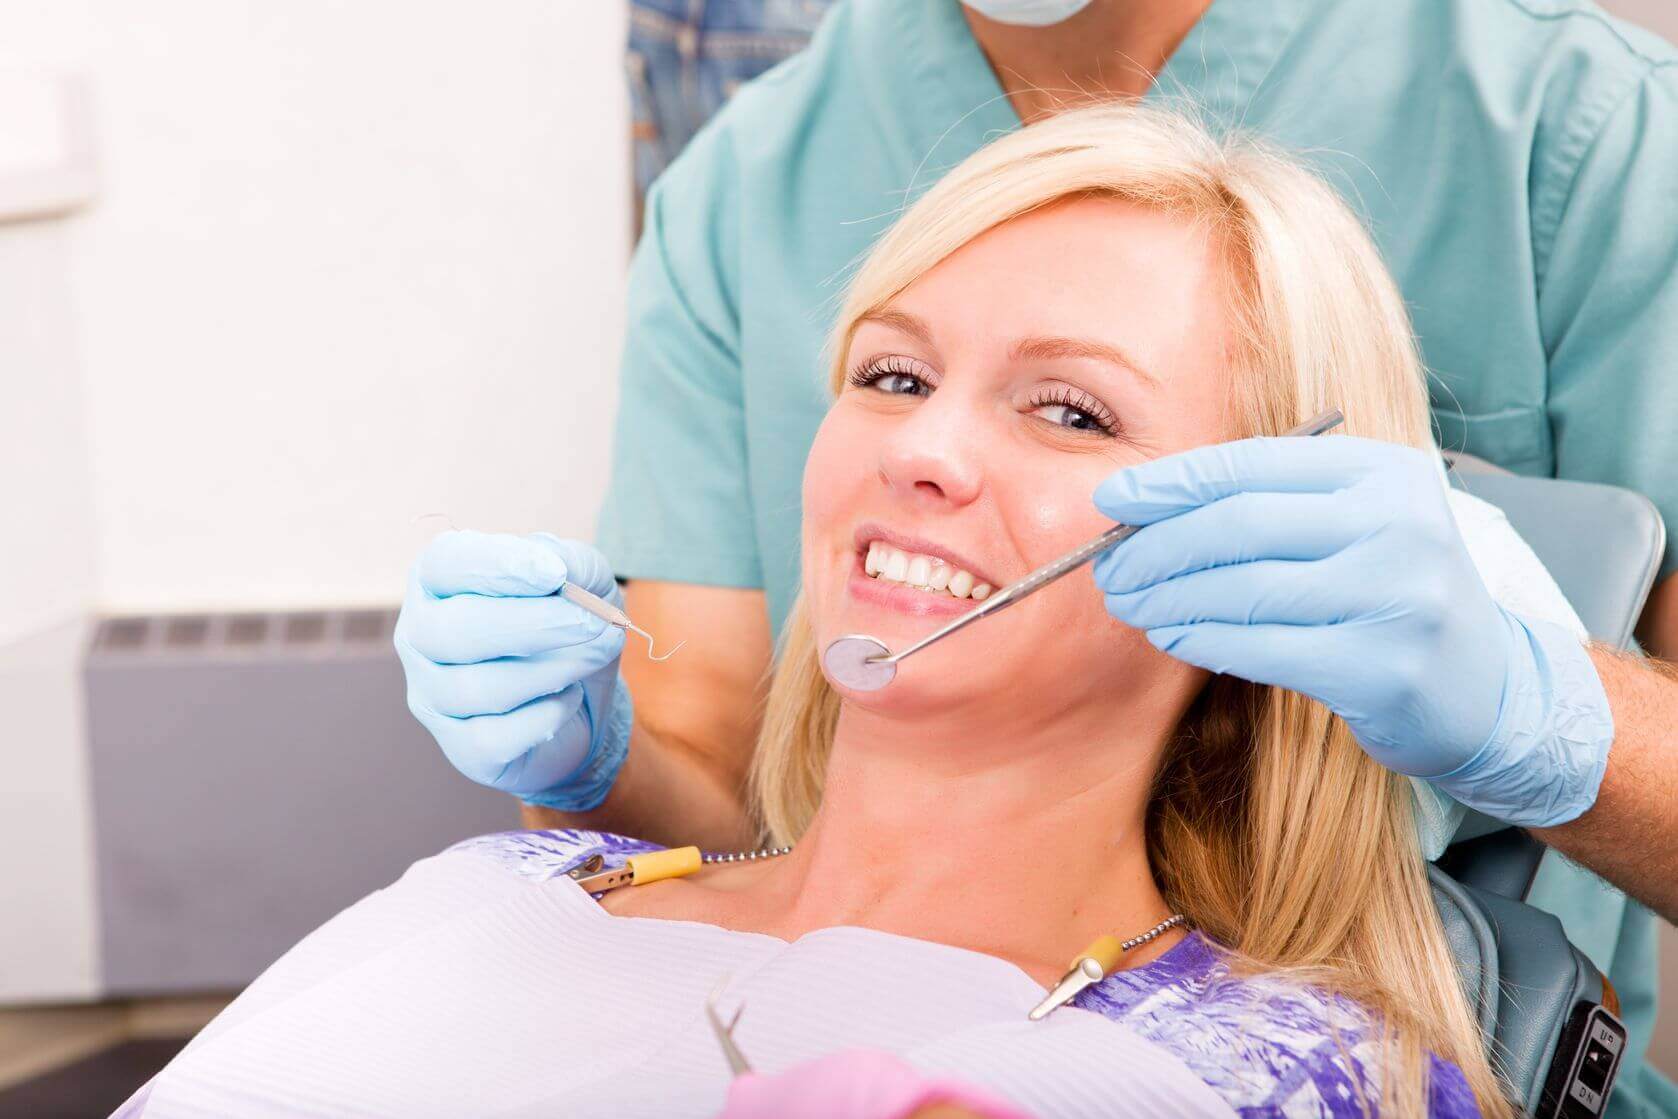 Why Dental Examinations are Important